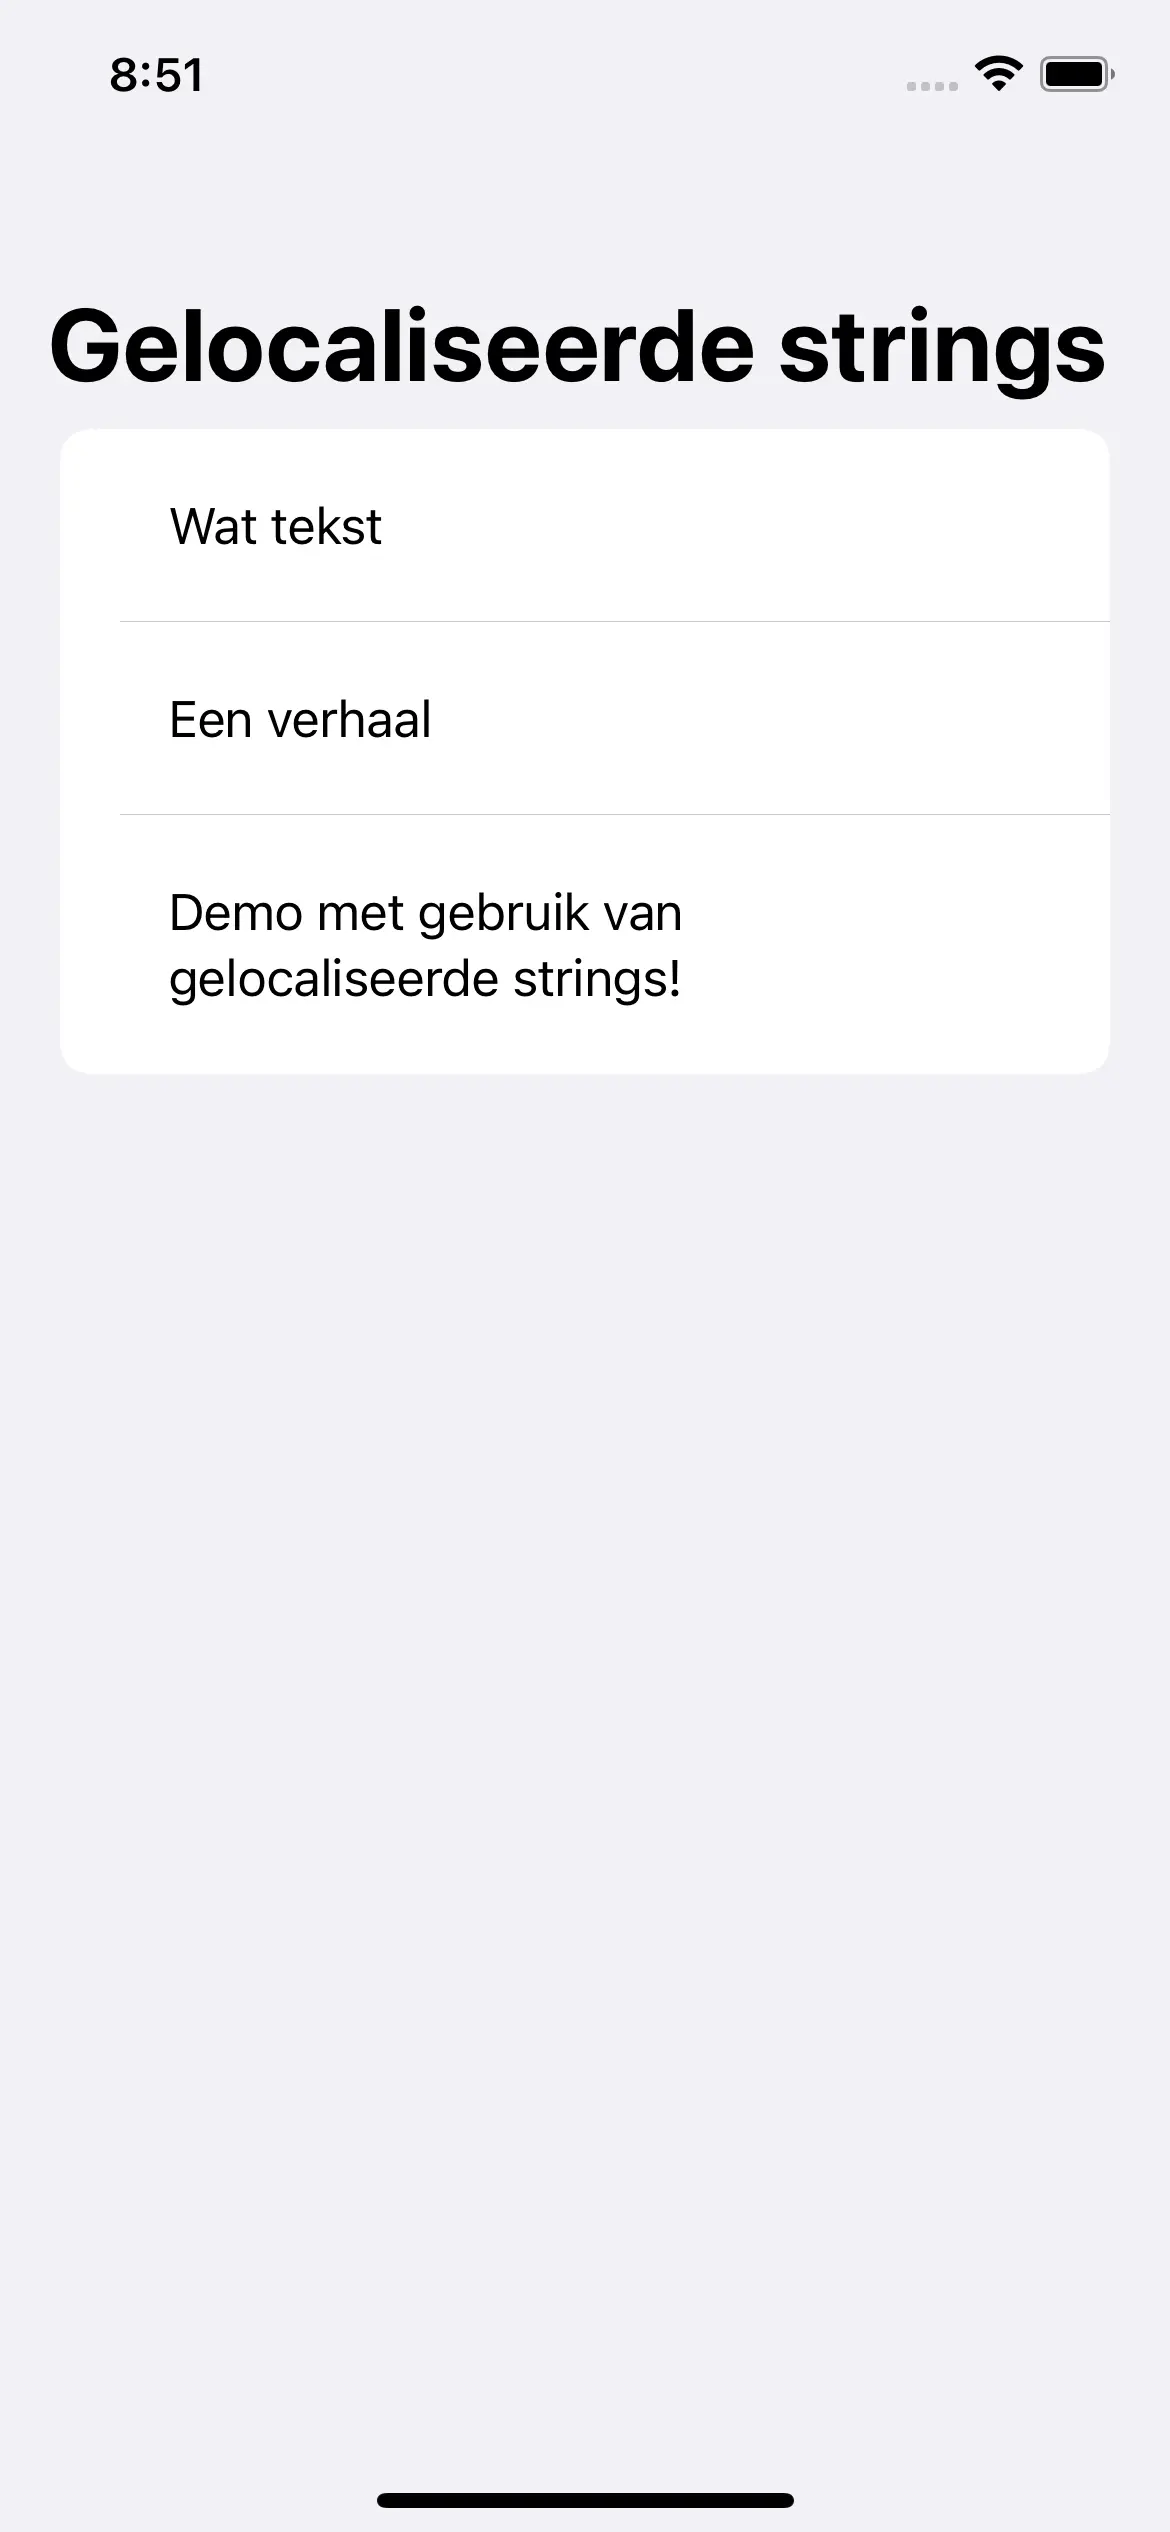 ContentView.swift build with local language Dutch